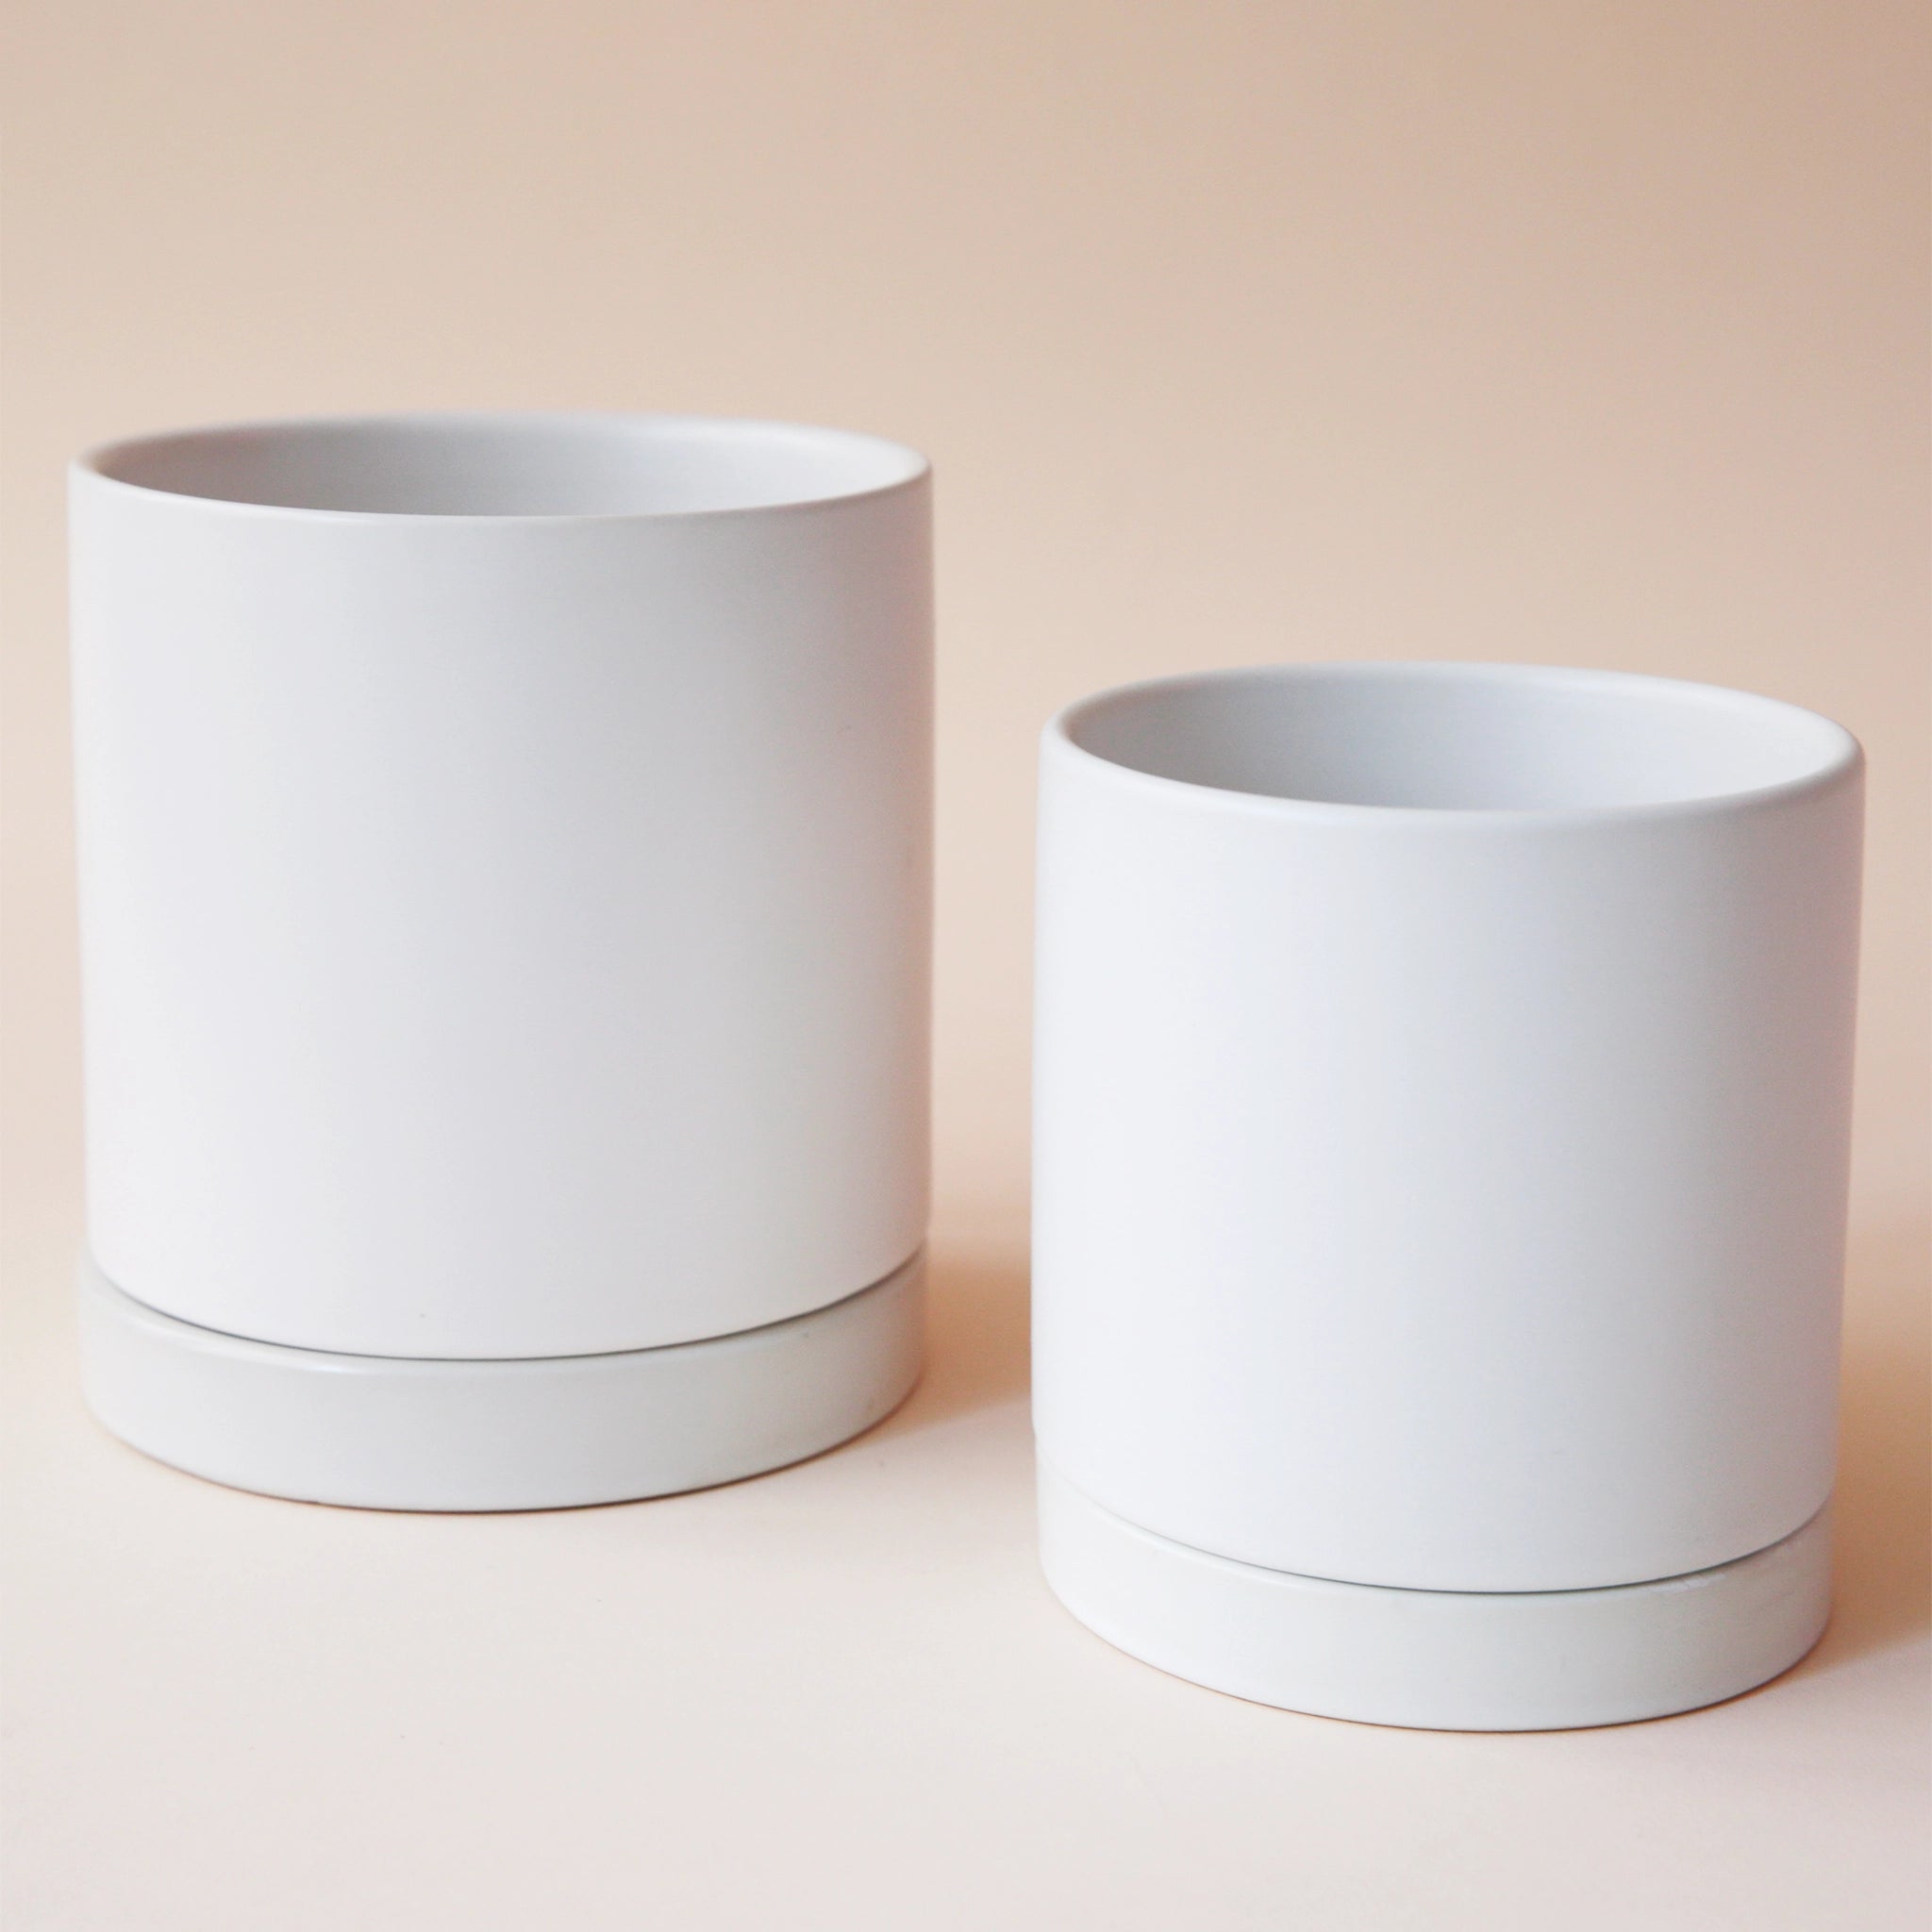 two simple white cylindrical pots with matching saucer